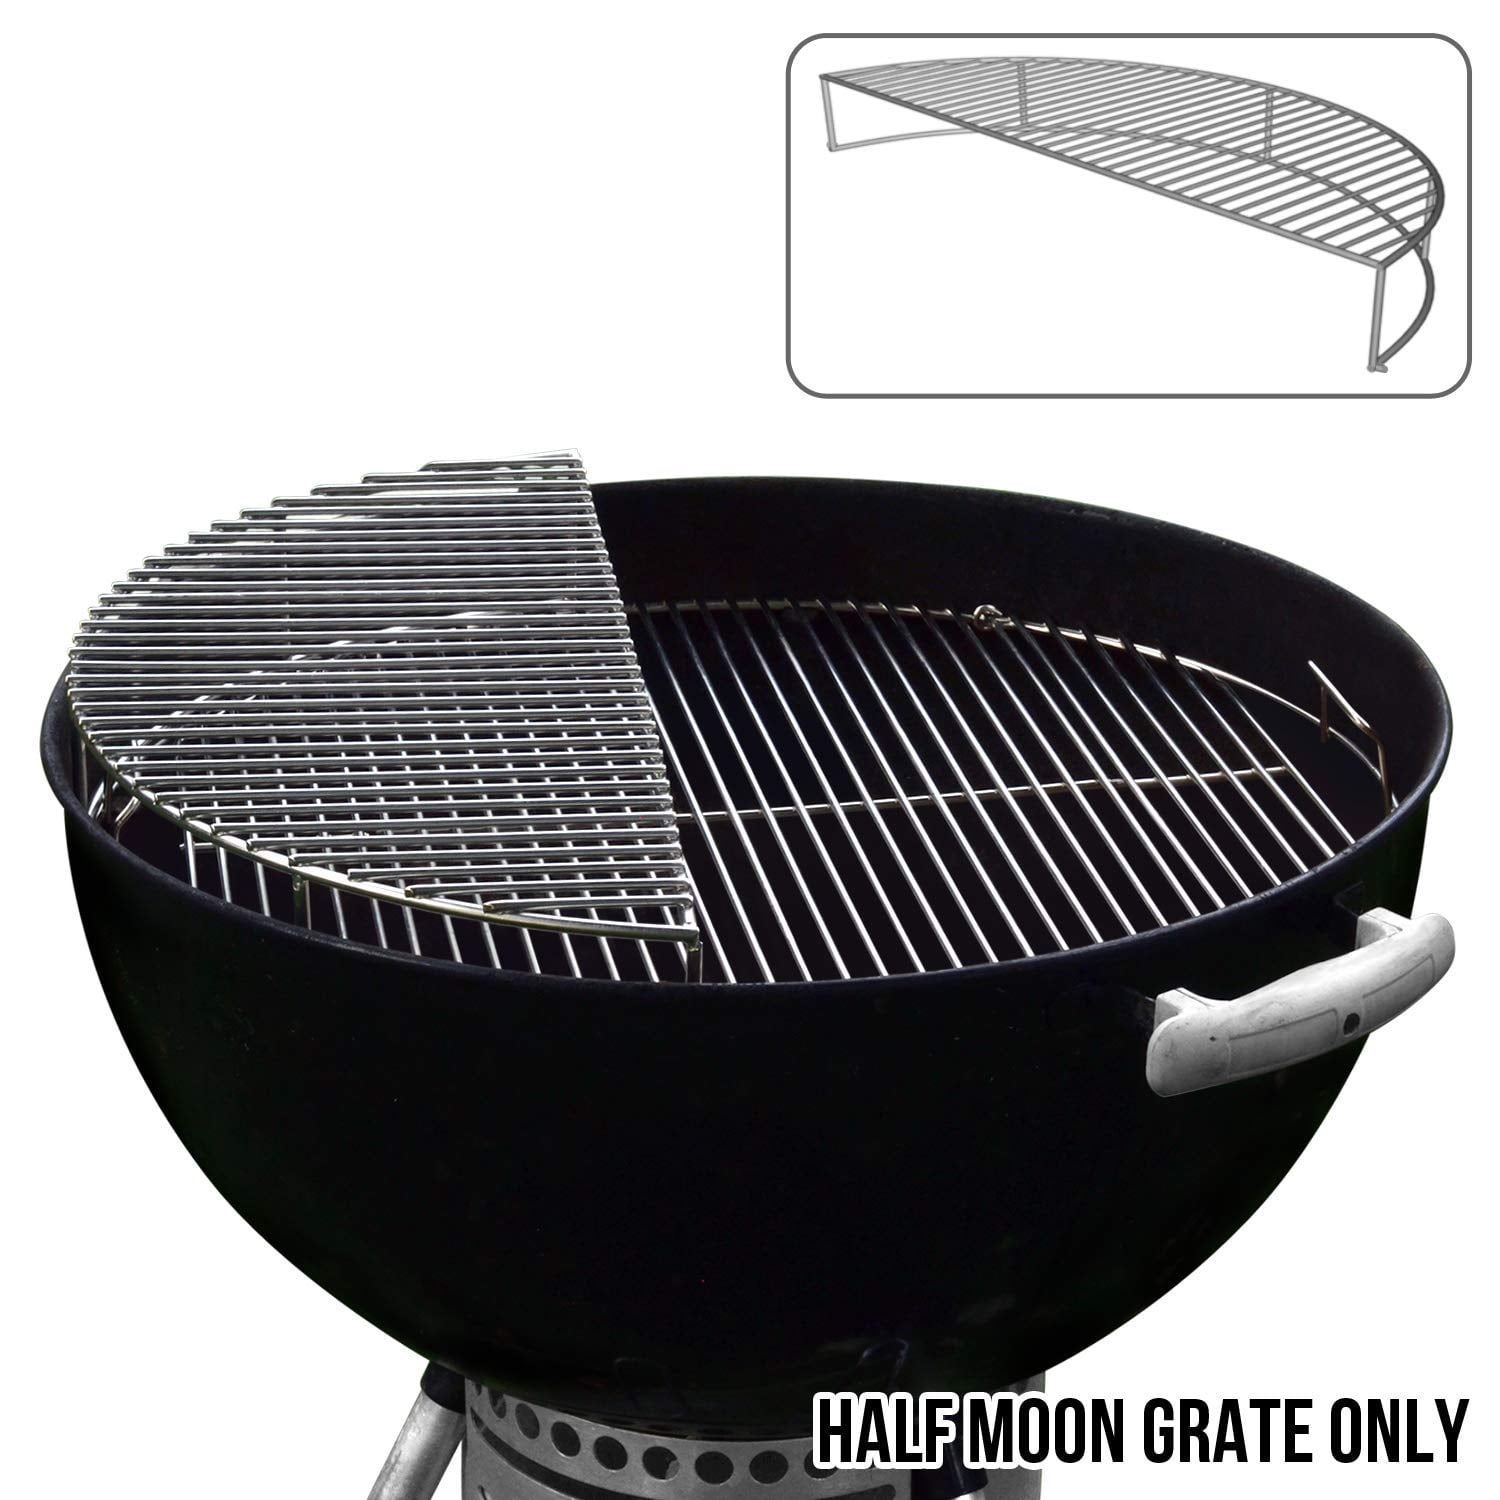 The Original 'Upper Deck' Stainless Steel Grilling Rack/Warming Rack/Charcoal Grill Use with Weber 22 inch Kettle Grill- Charcoal Grilling Accessories and Grill Tools Grill Rack? - Walmart.com